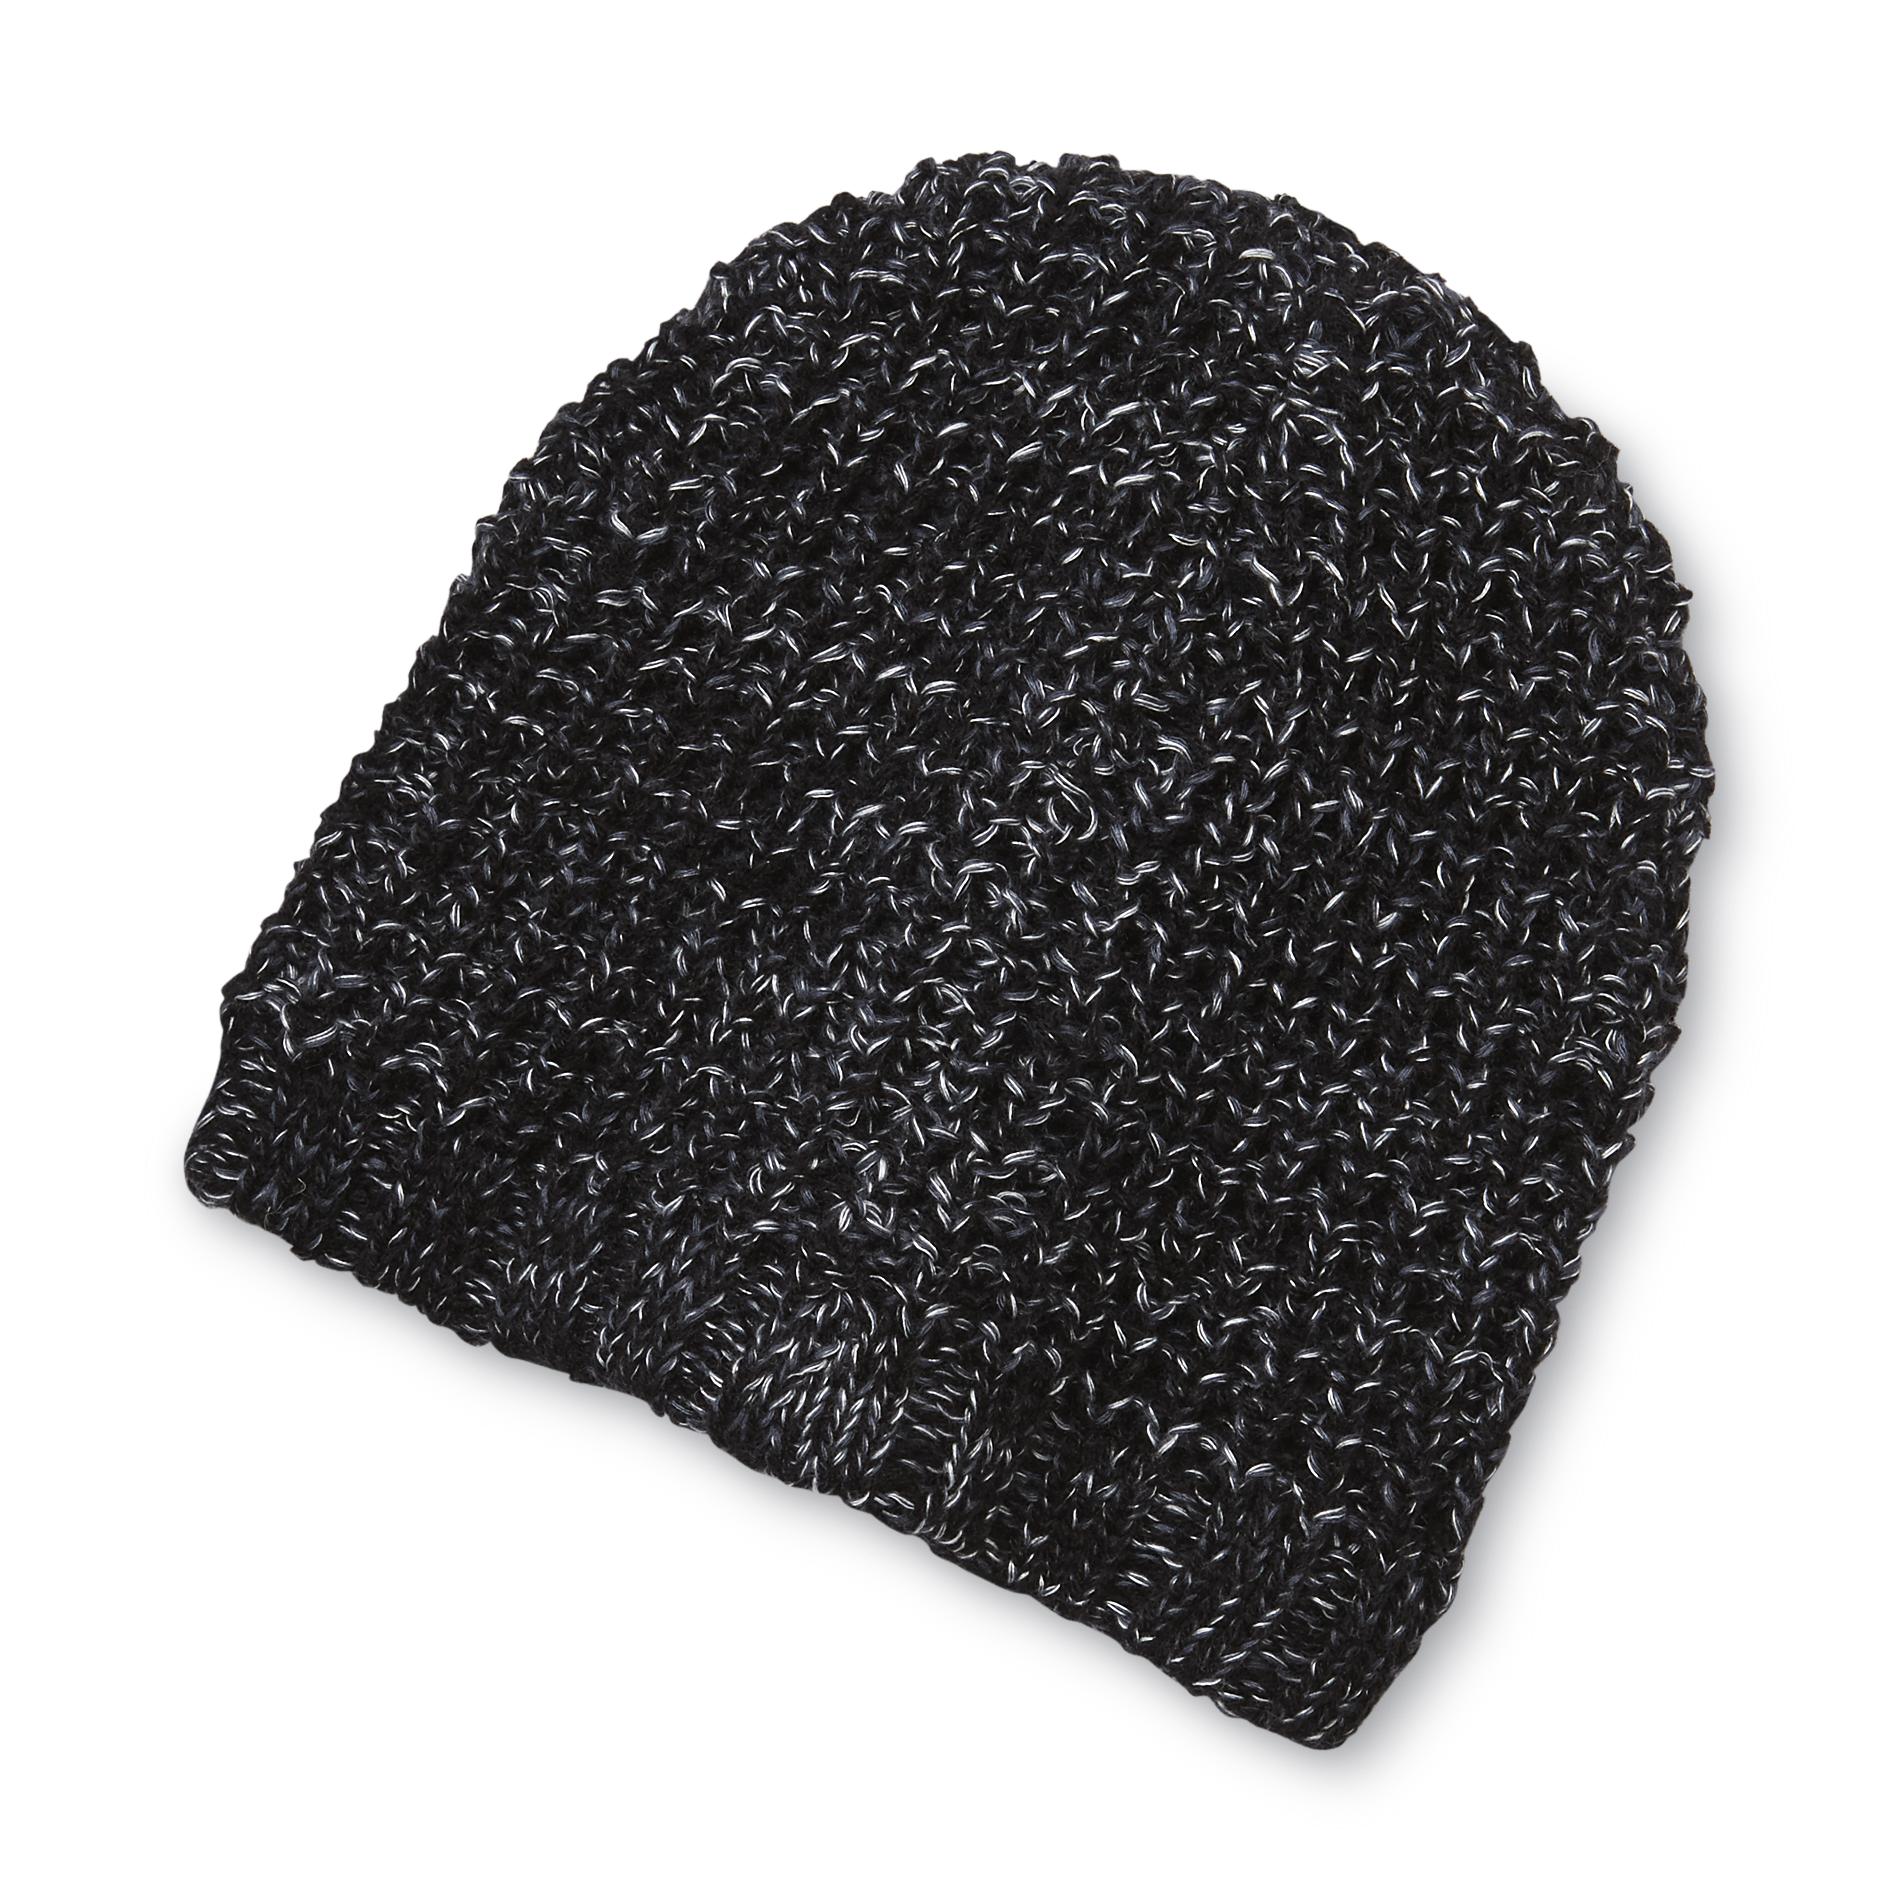 Route 66 Men's Marled Knit Hat